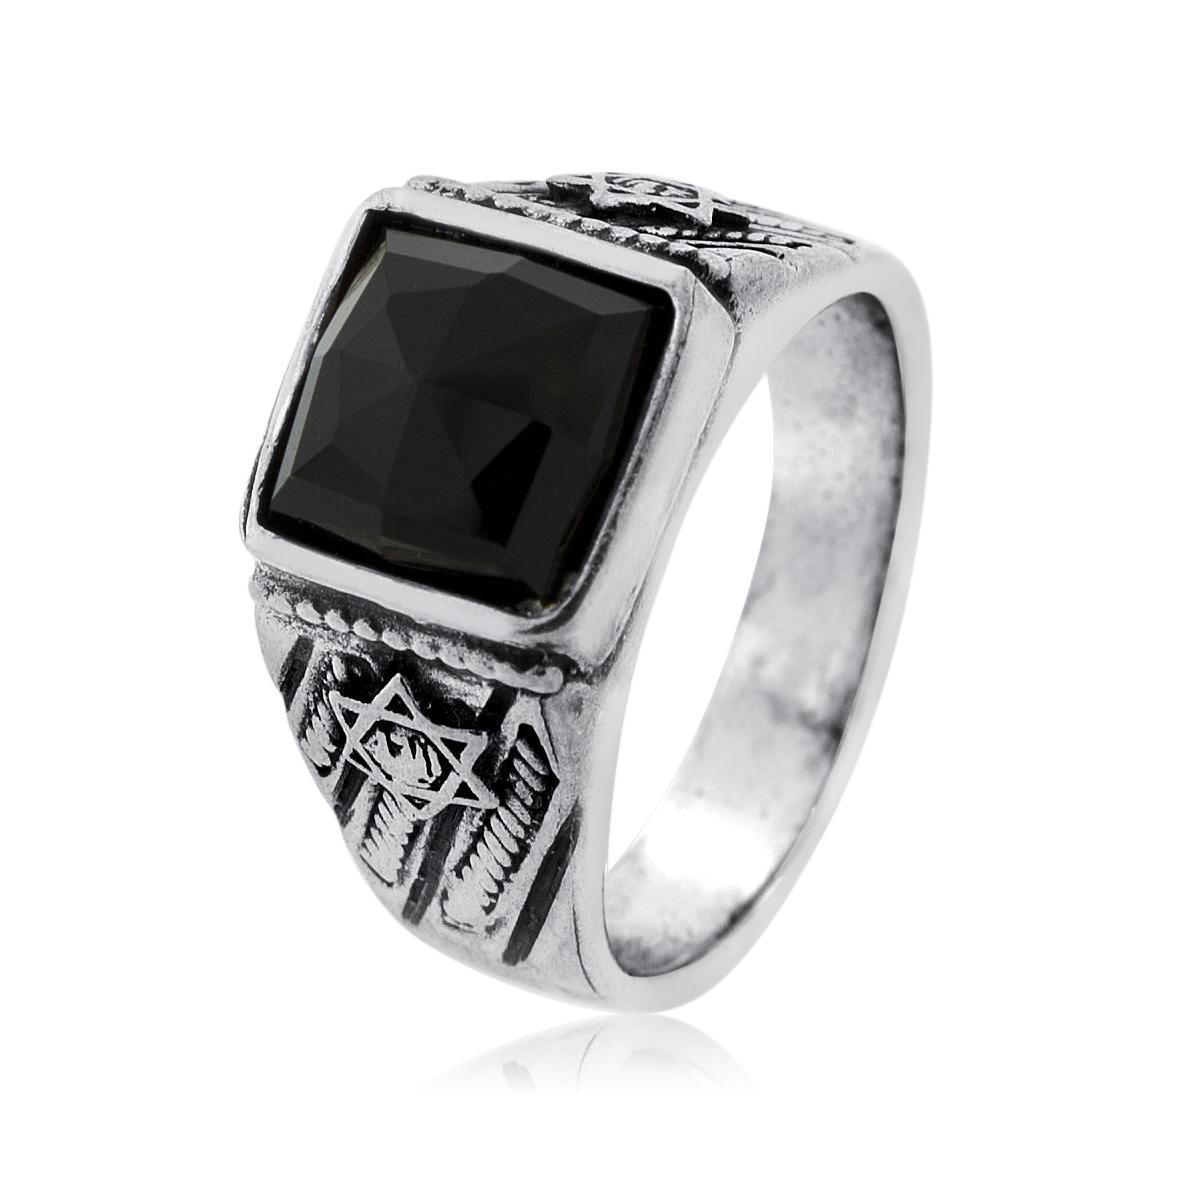 Stars of David: Sterling Silver Ring with Onyx Stone - 1